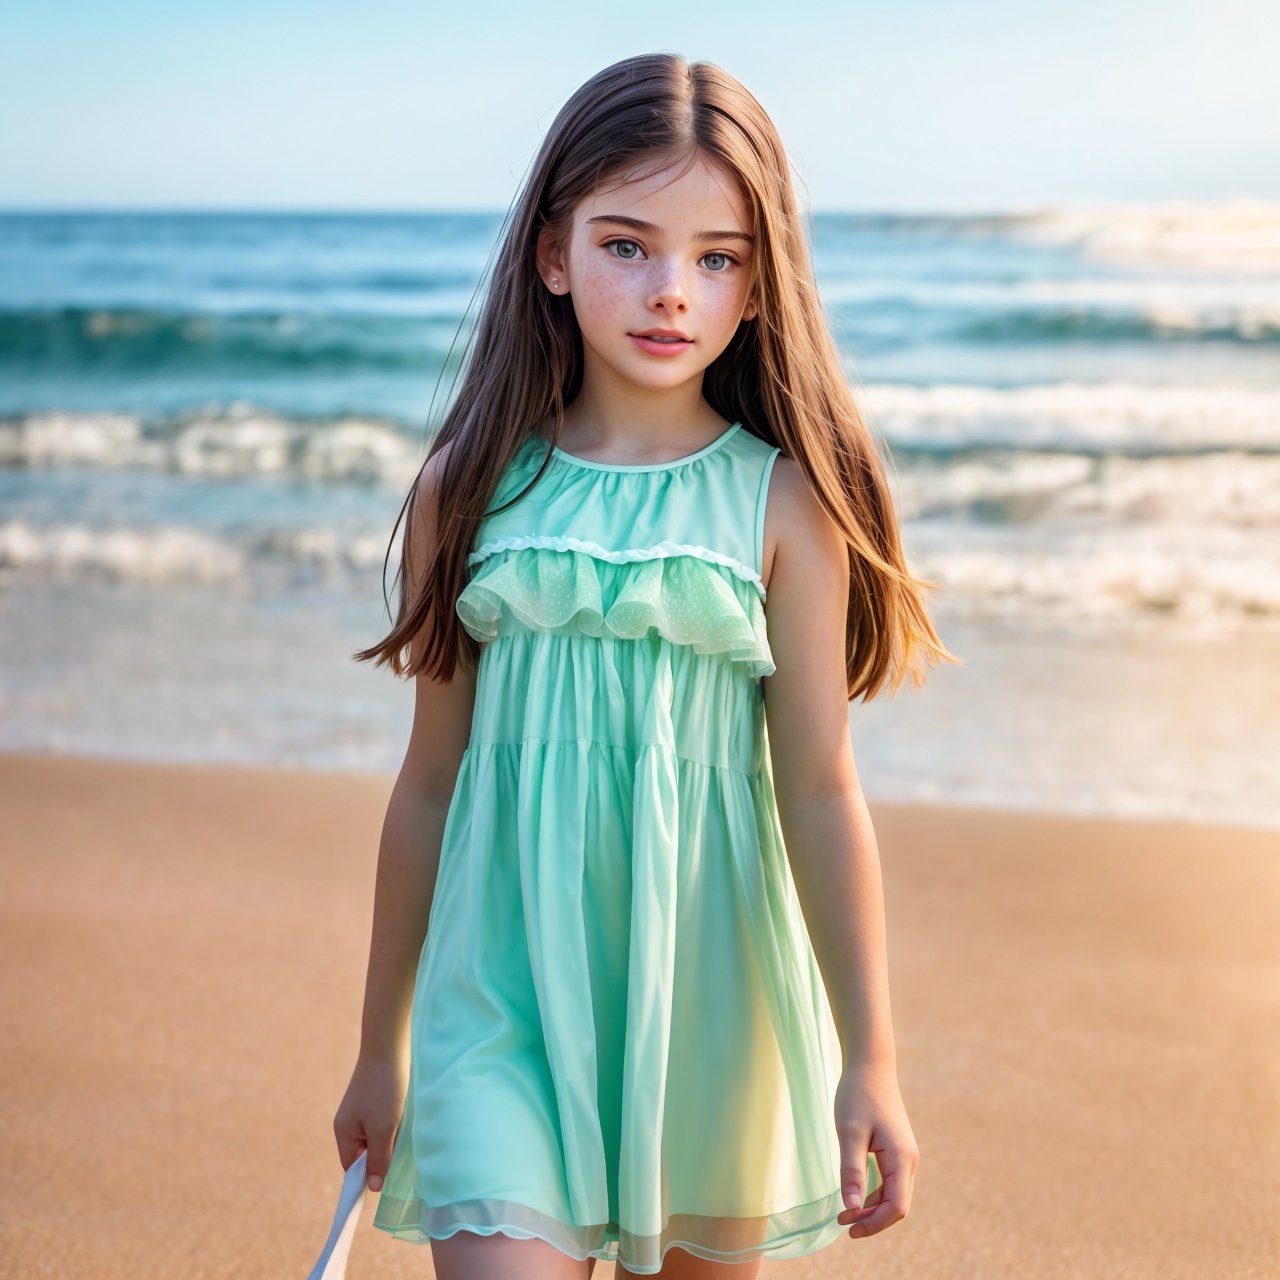 best quality, extra resolution, wallpaper, HD quality, HD, HQ, 4K looking back, profile of self-assurance (AIDA_LoRA_MeW2016:1.12) <lora:AIDA_LoRA_MeW2016:0.85> in (simple green dress:1.1), [little girl], glossy skin with visible pores and freckles, pretty face, naughty, funny, happy, playful, cinematic, dramatic, composition, kkw-ph1, (colorful:1.1), (on the seashore:1.1), sea, sand, sky, (on the beach:1.1), sunlight, outdoors